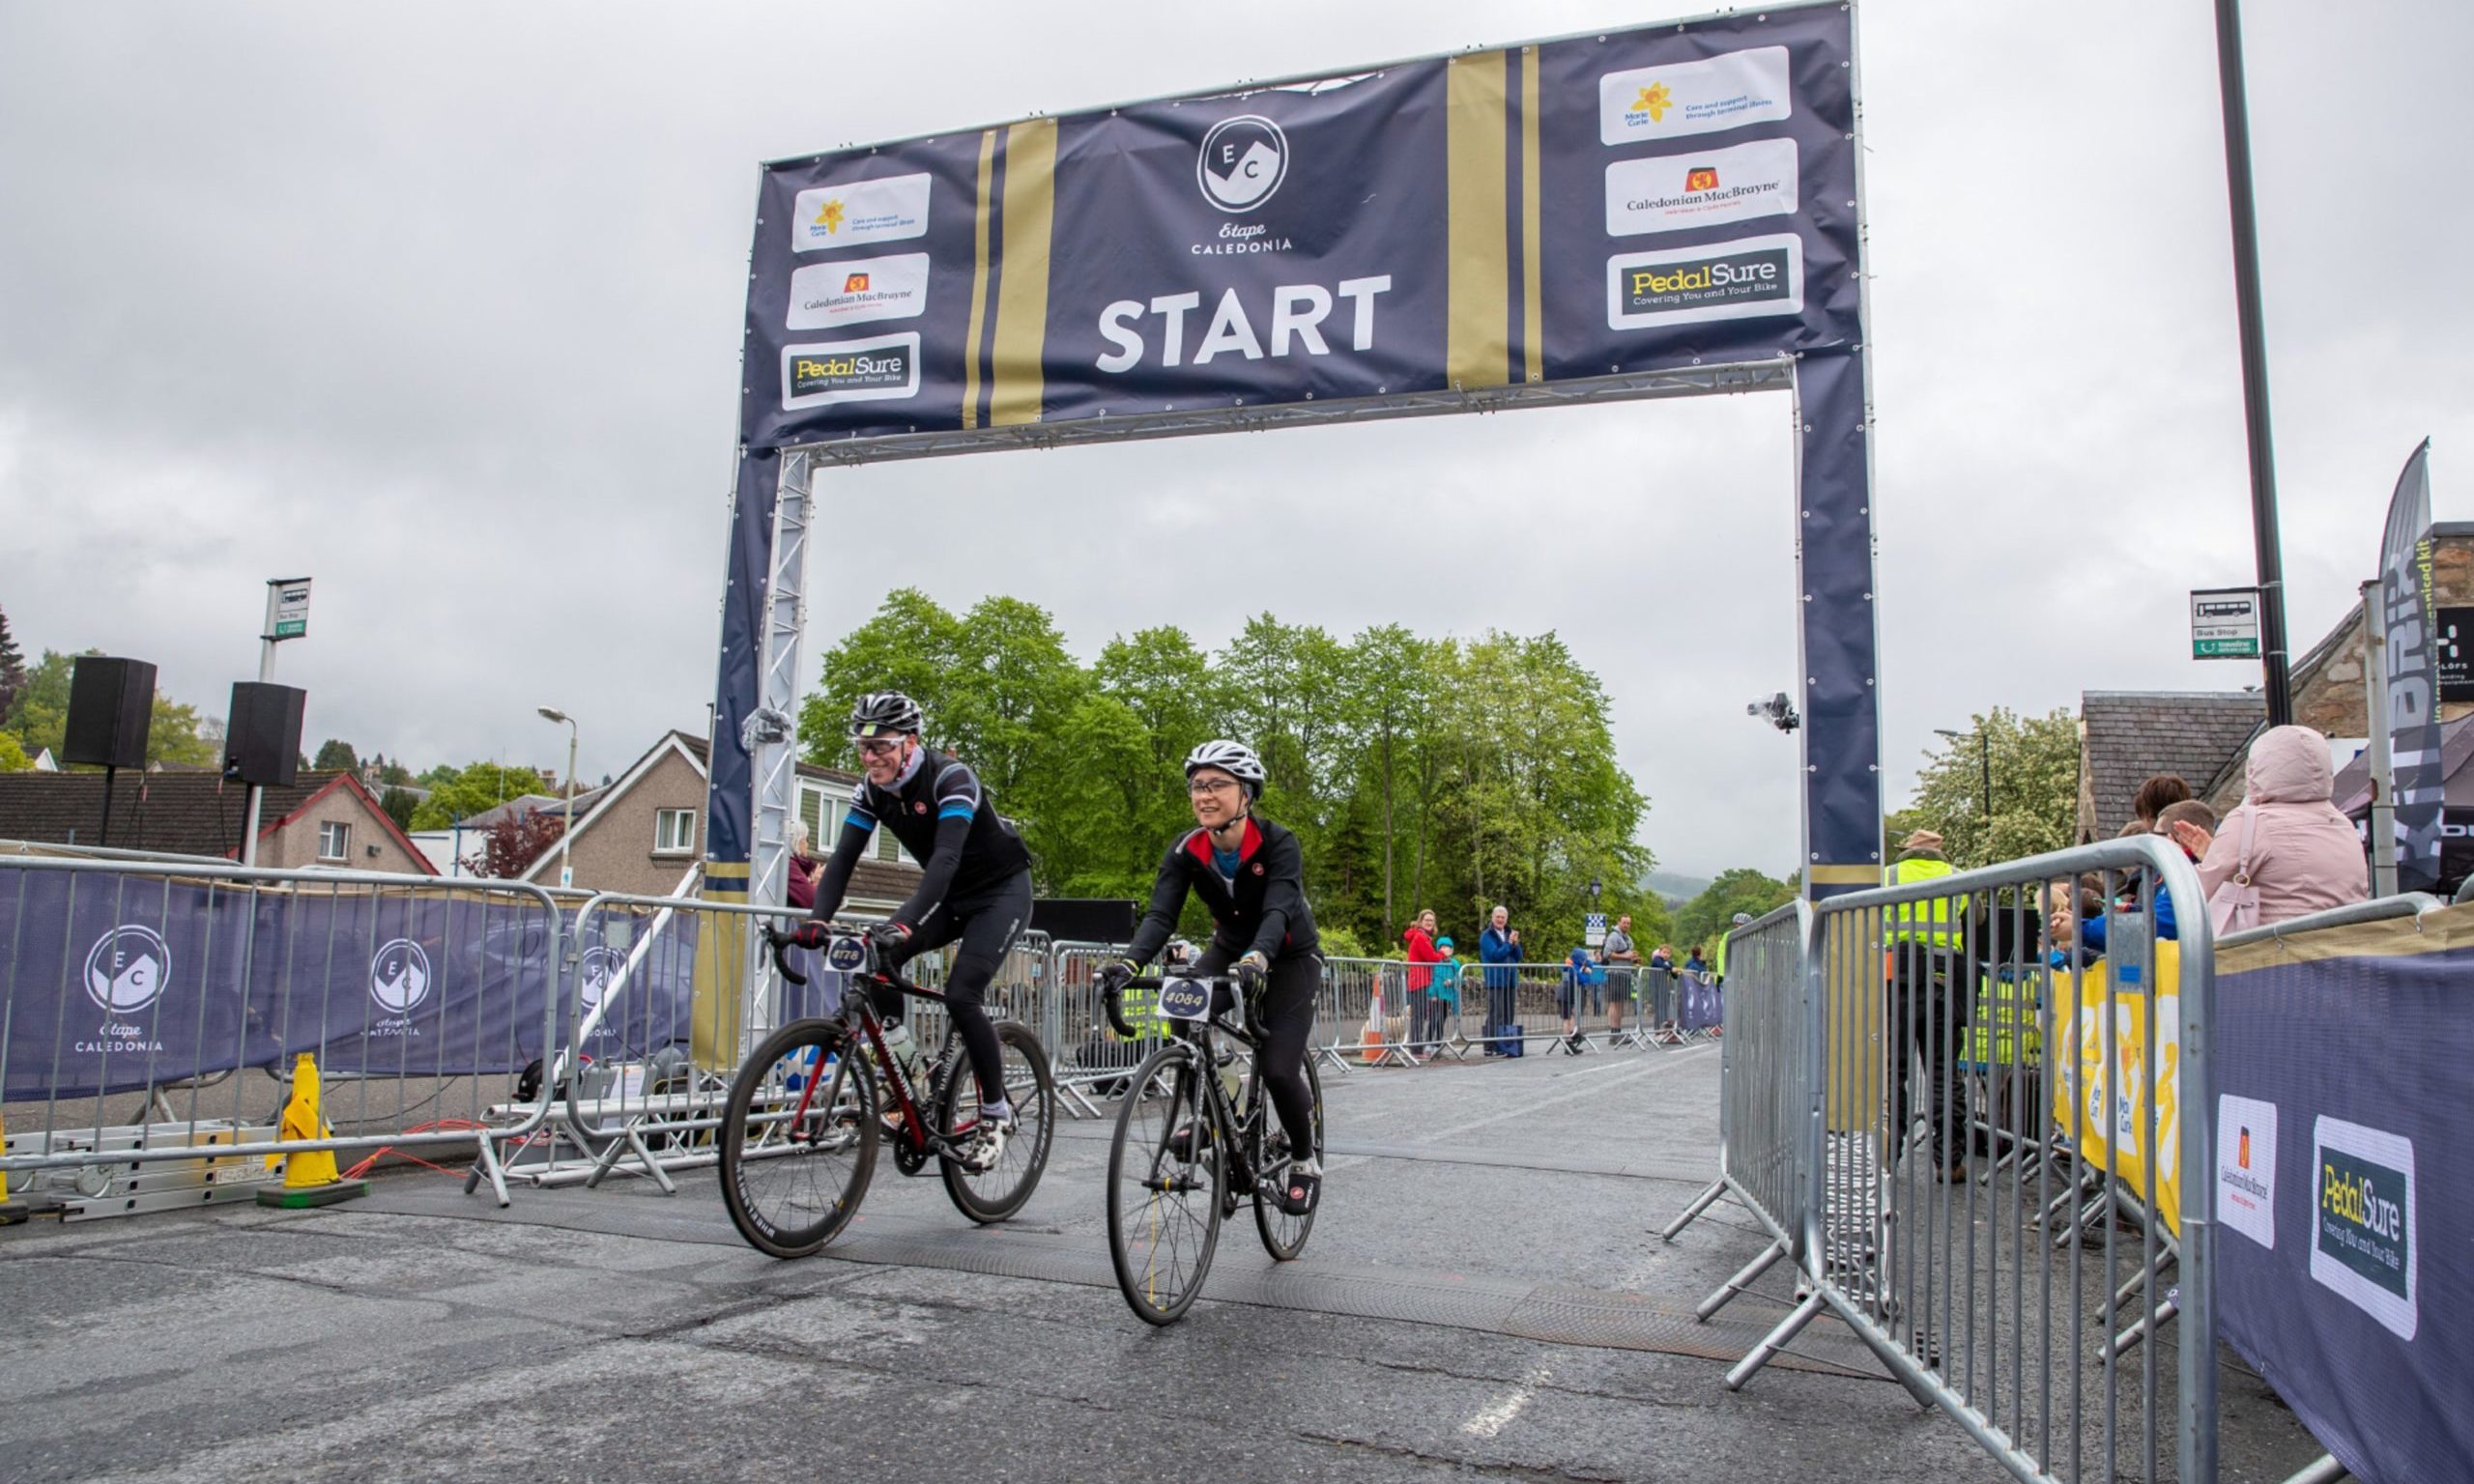 Etape Caledonia postponed due to traffic restrictions around Covid-19 vaccination centre